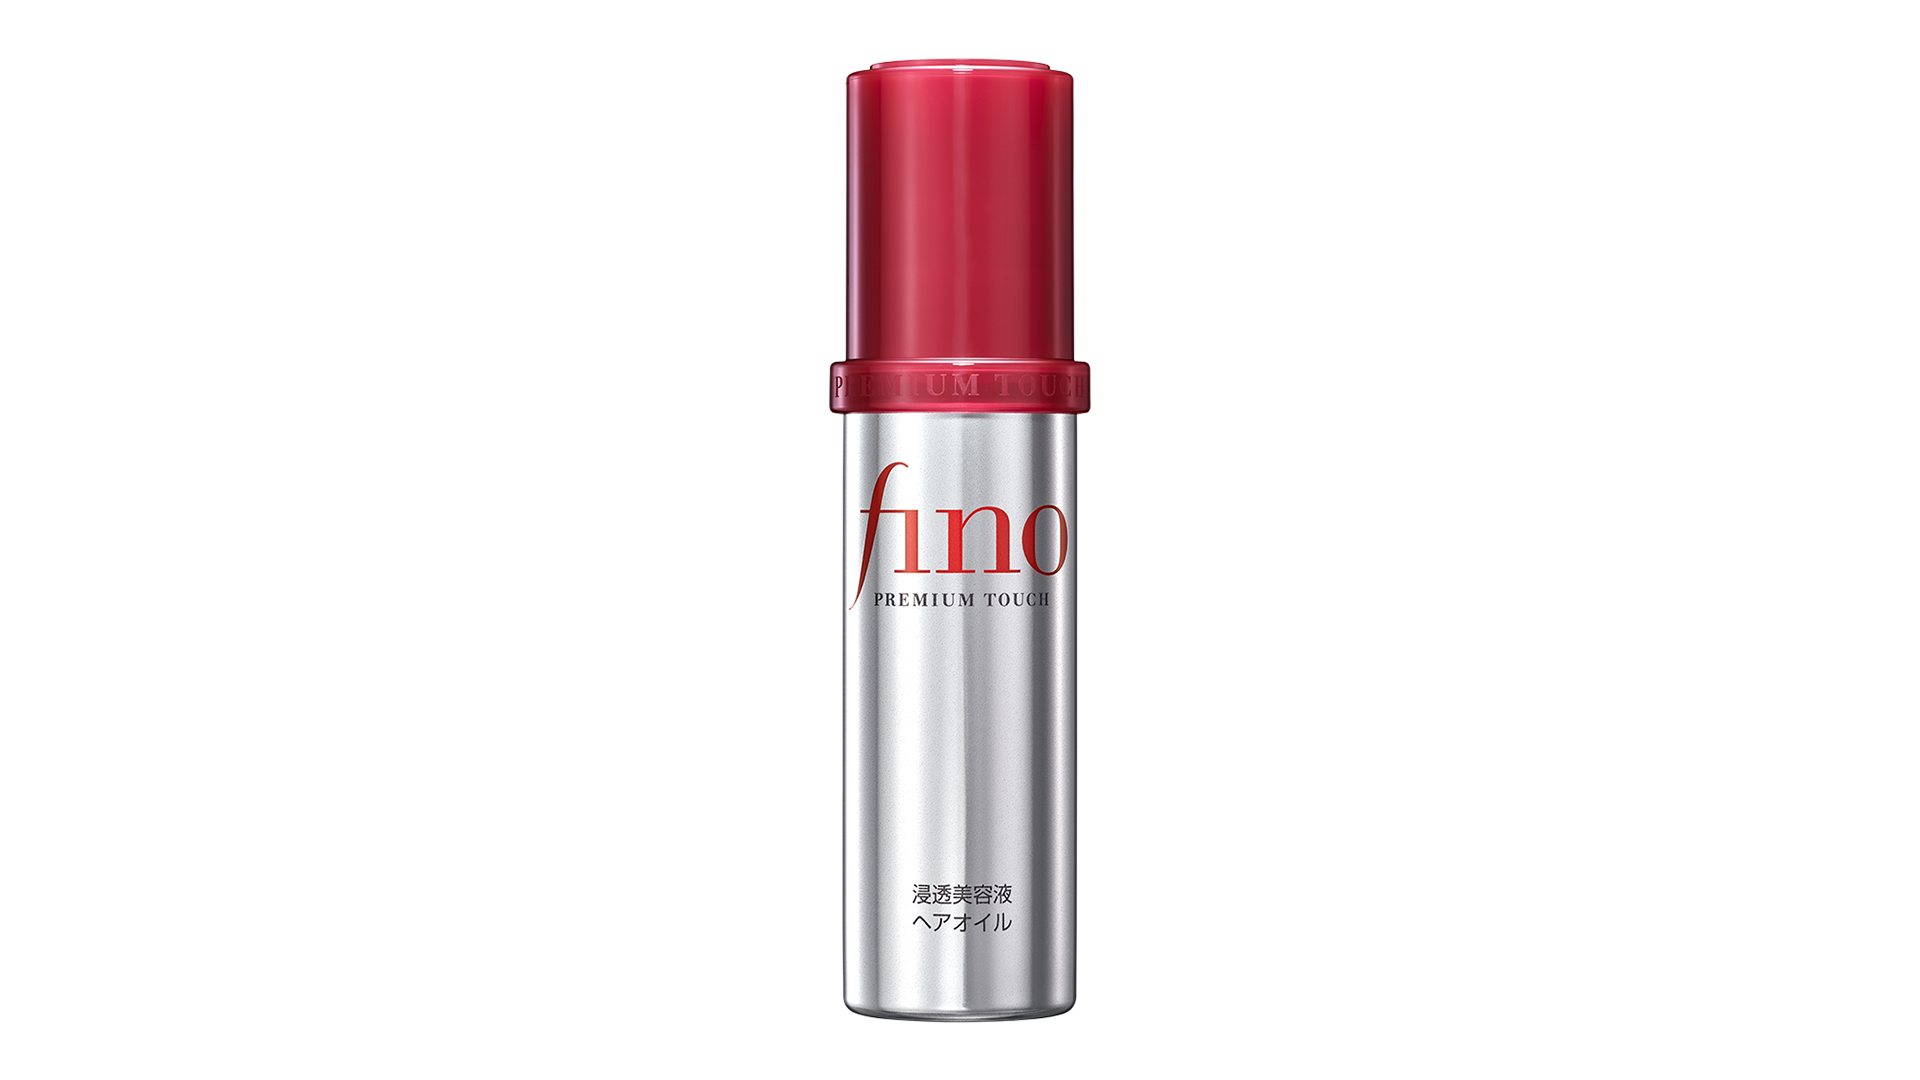 Intensive repair of damage keeps hair smooth! Introducing new hair oil from  Fino, No. 1 in in-bath treatment sales*<sup>1</sup>! - FineToday